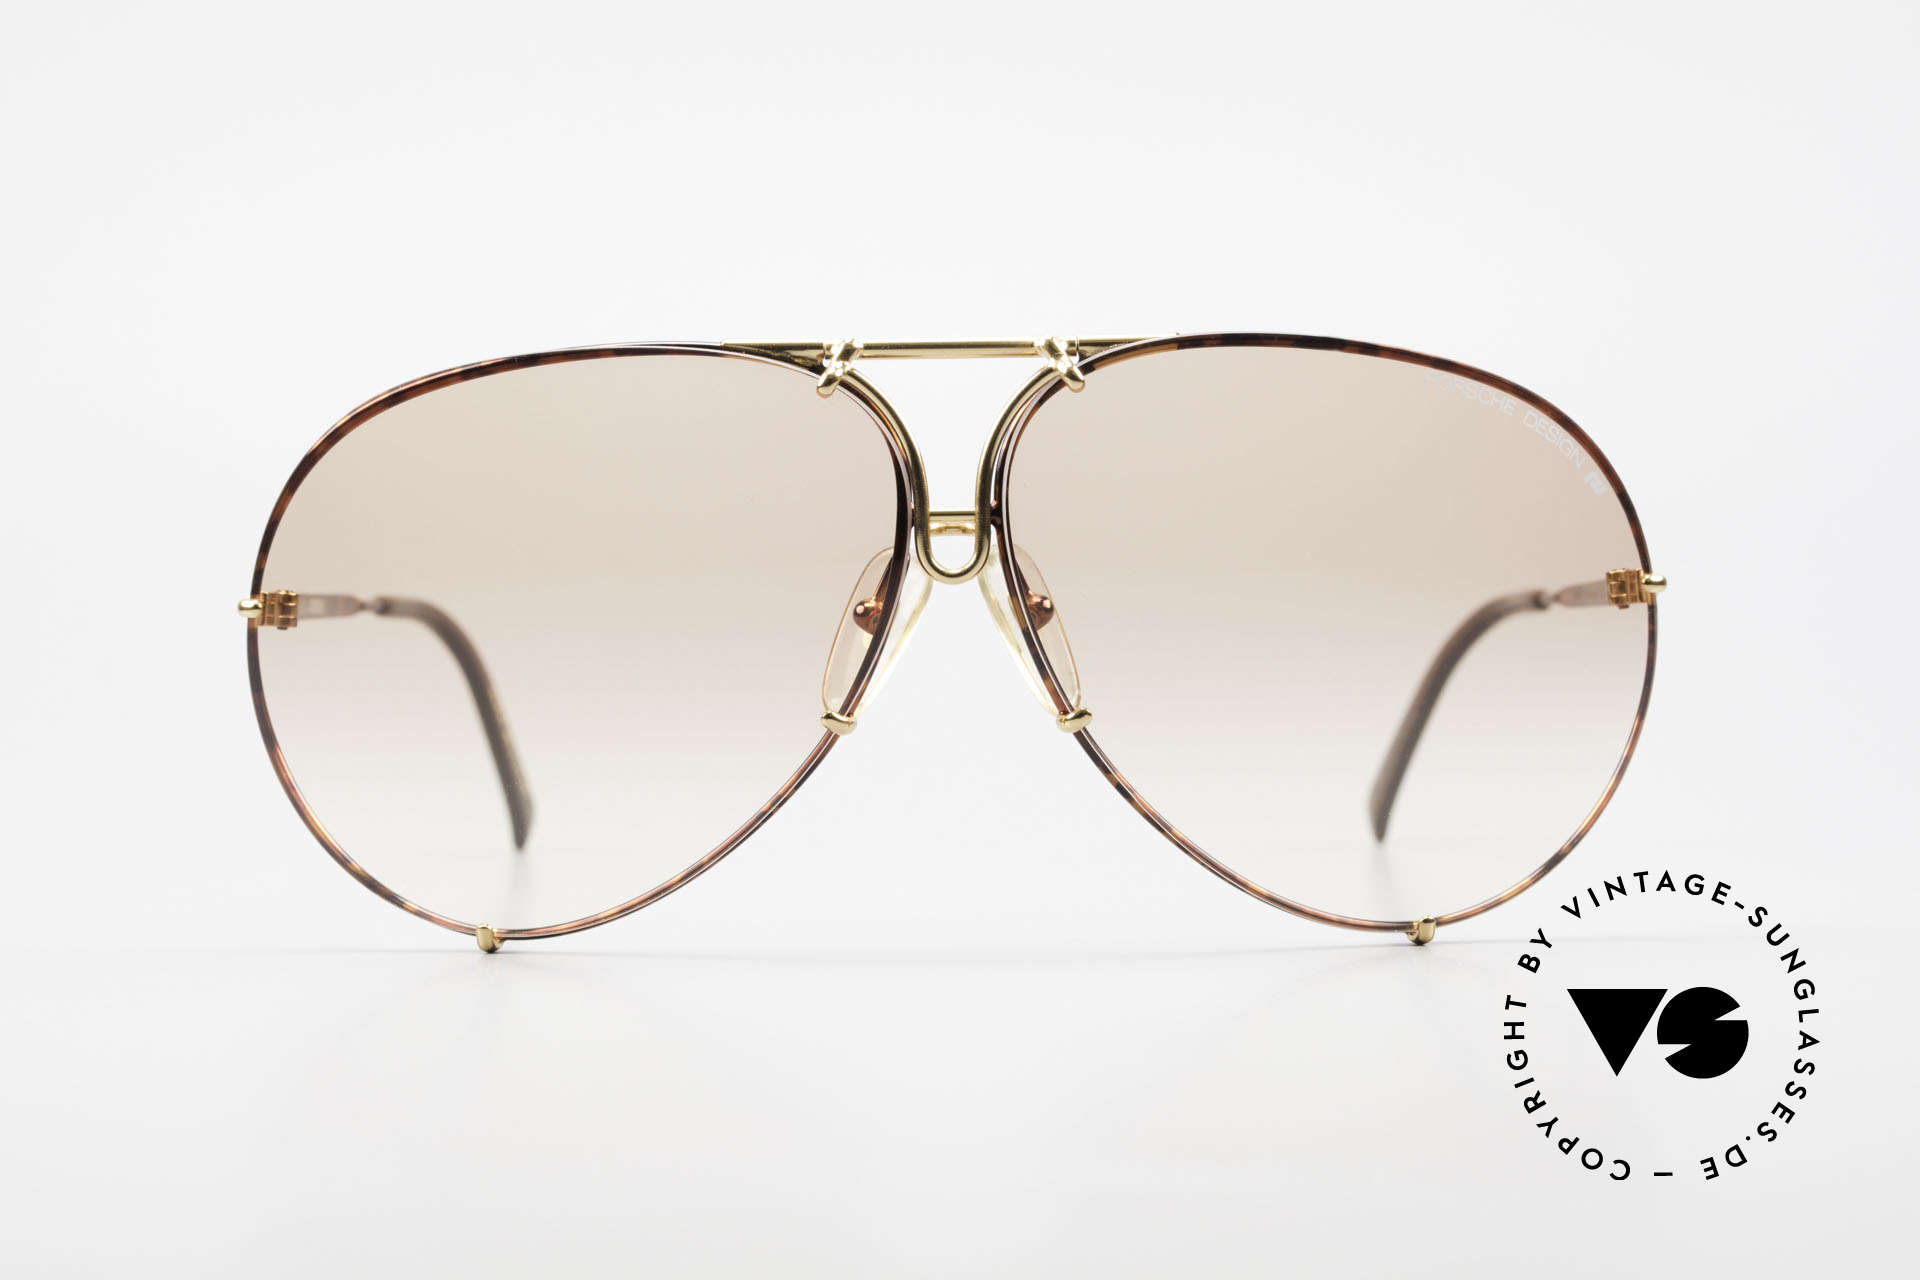 Porsche 5621 XL 80's Aviator Sunglasses, one of the most wanted vintage models, worldwide, Made for Men